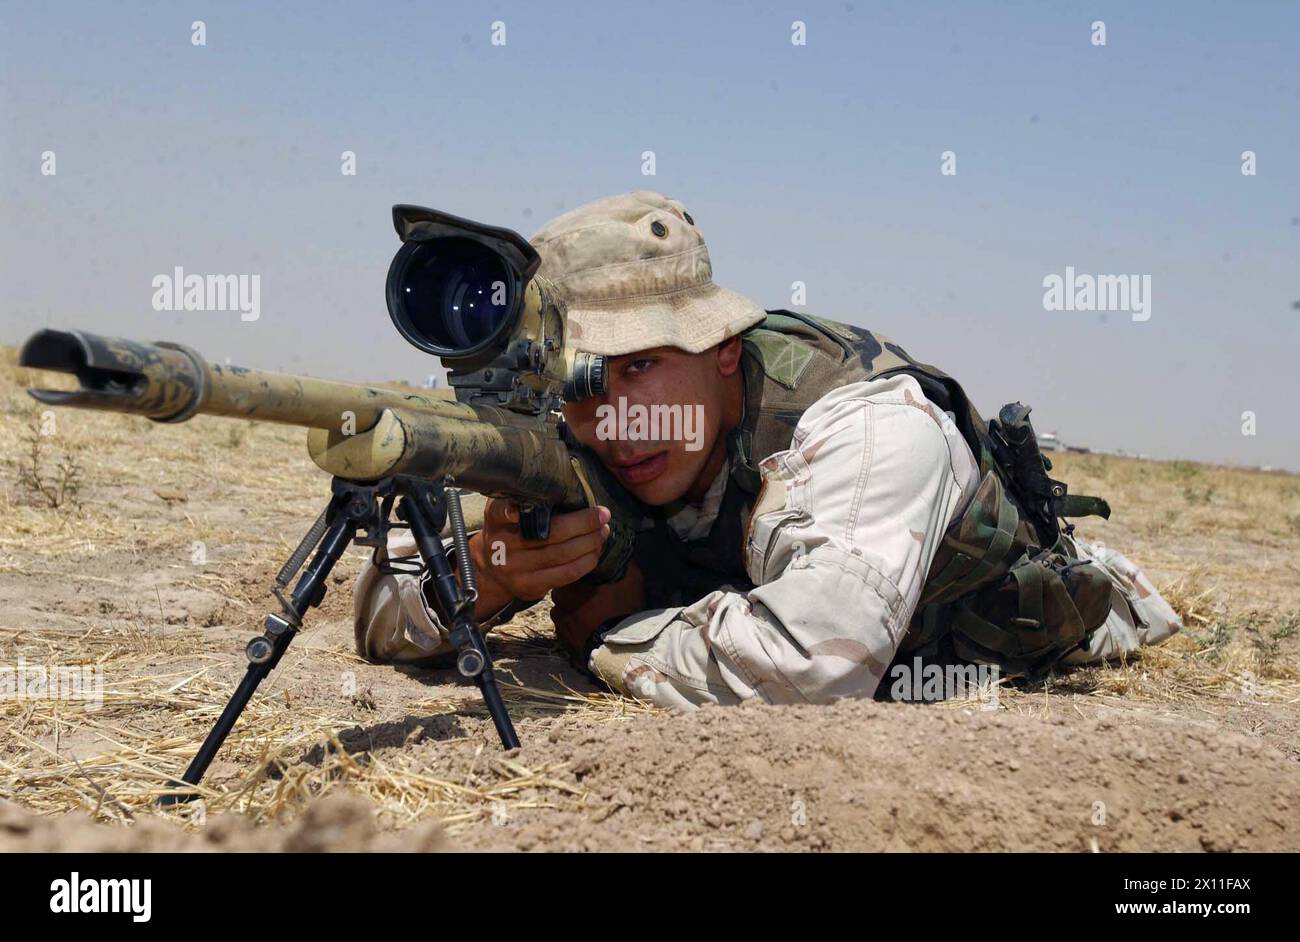 Spc. John Shore looks through the scope of his sniper rifle during an operation in Tall Afar, Iraq. He is a member of the 5th Battalion, 20th Infantry Regiment, 3rd Brigade, 2nd Infantry Division (Stryker Brigade Combat Team) ca. August 08, 2004 Stock Photo